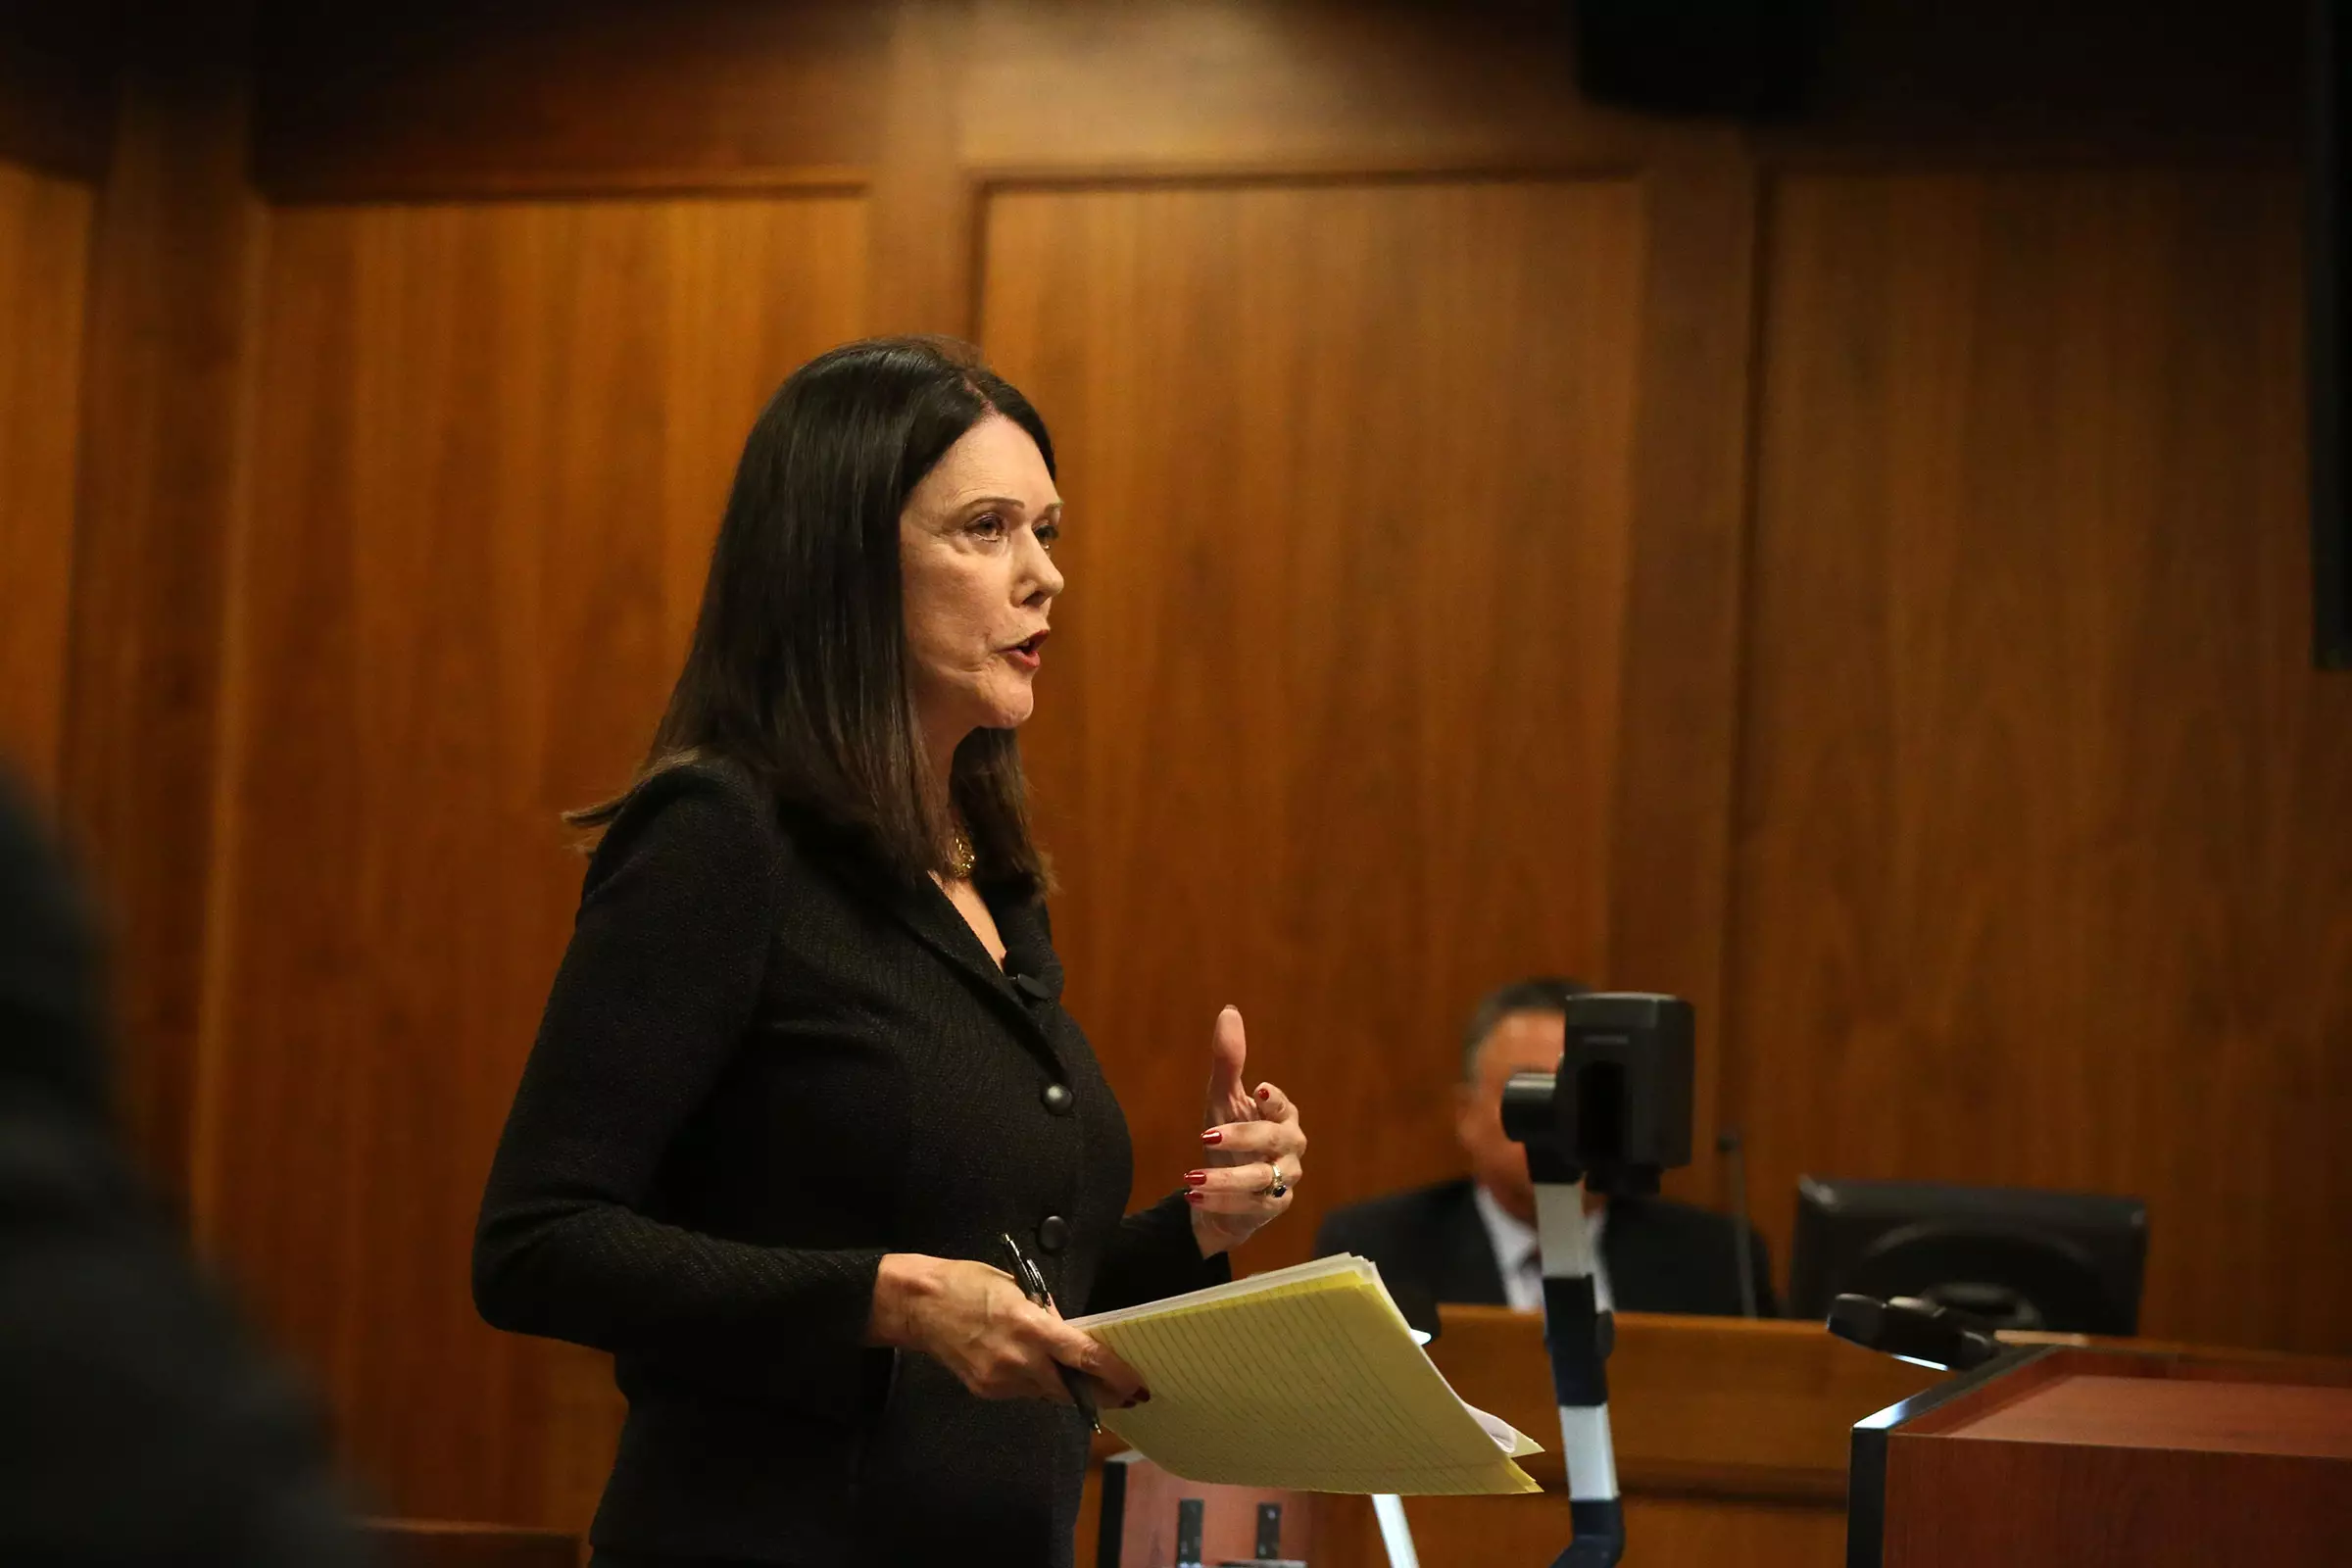 Ms Zellner in court for a different matter.